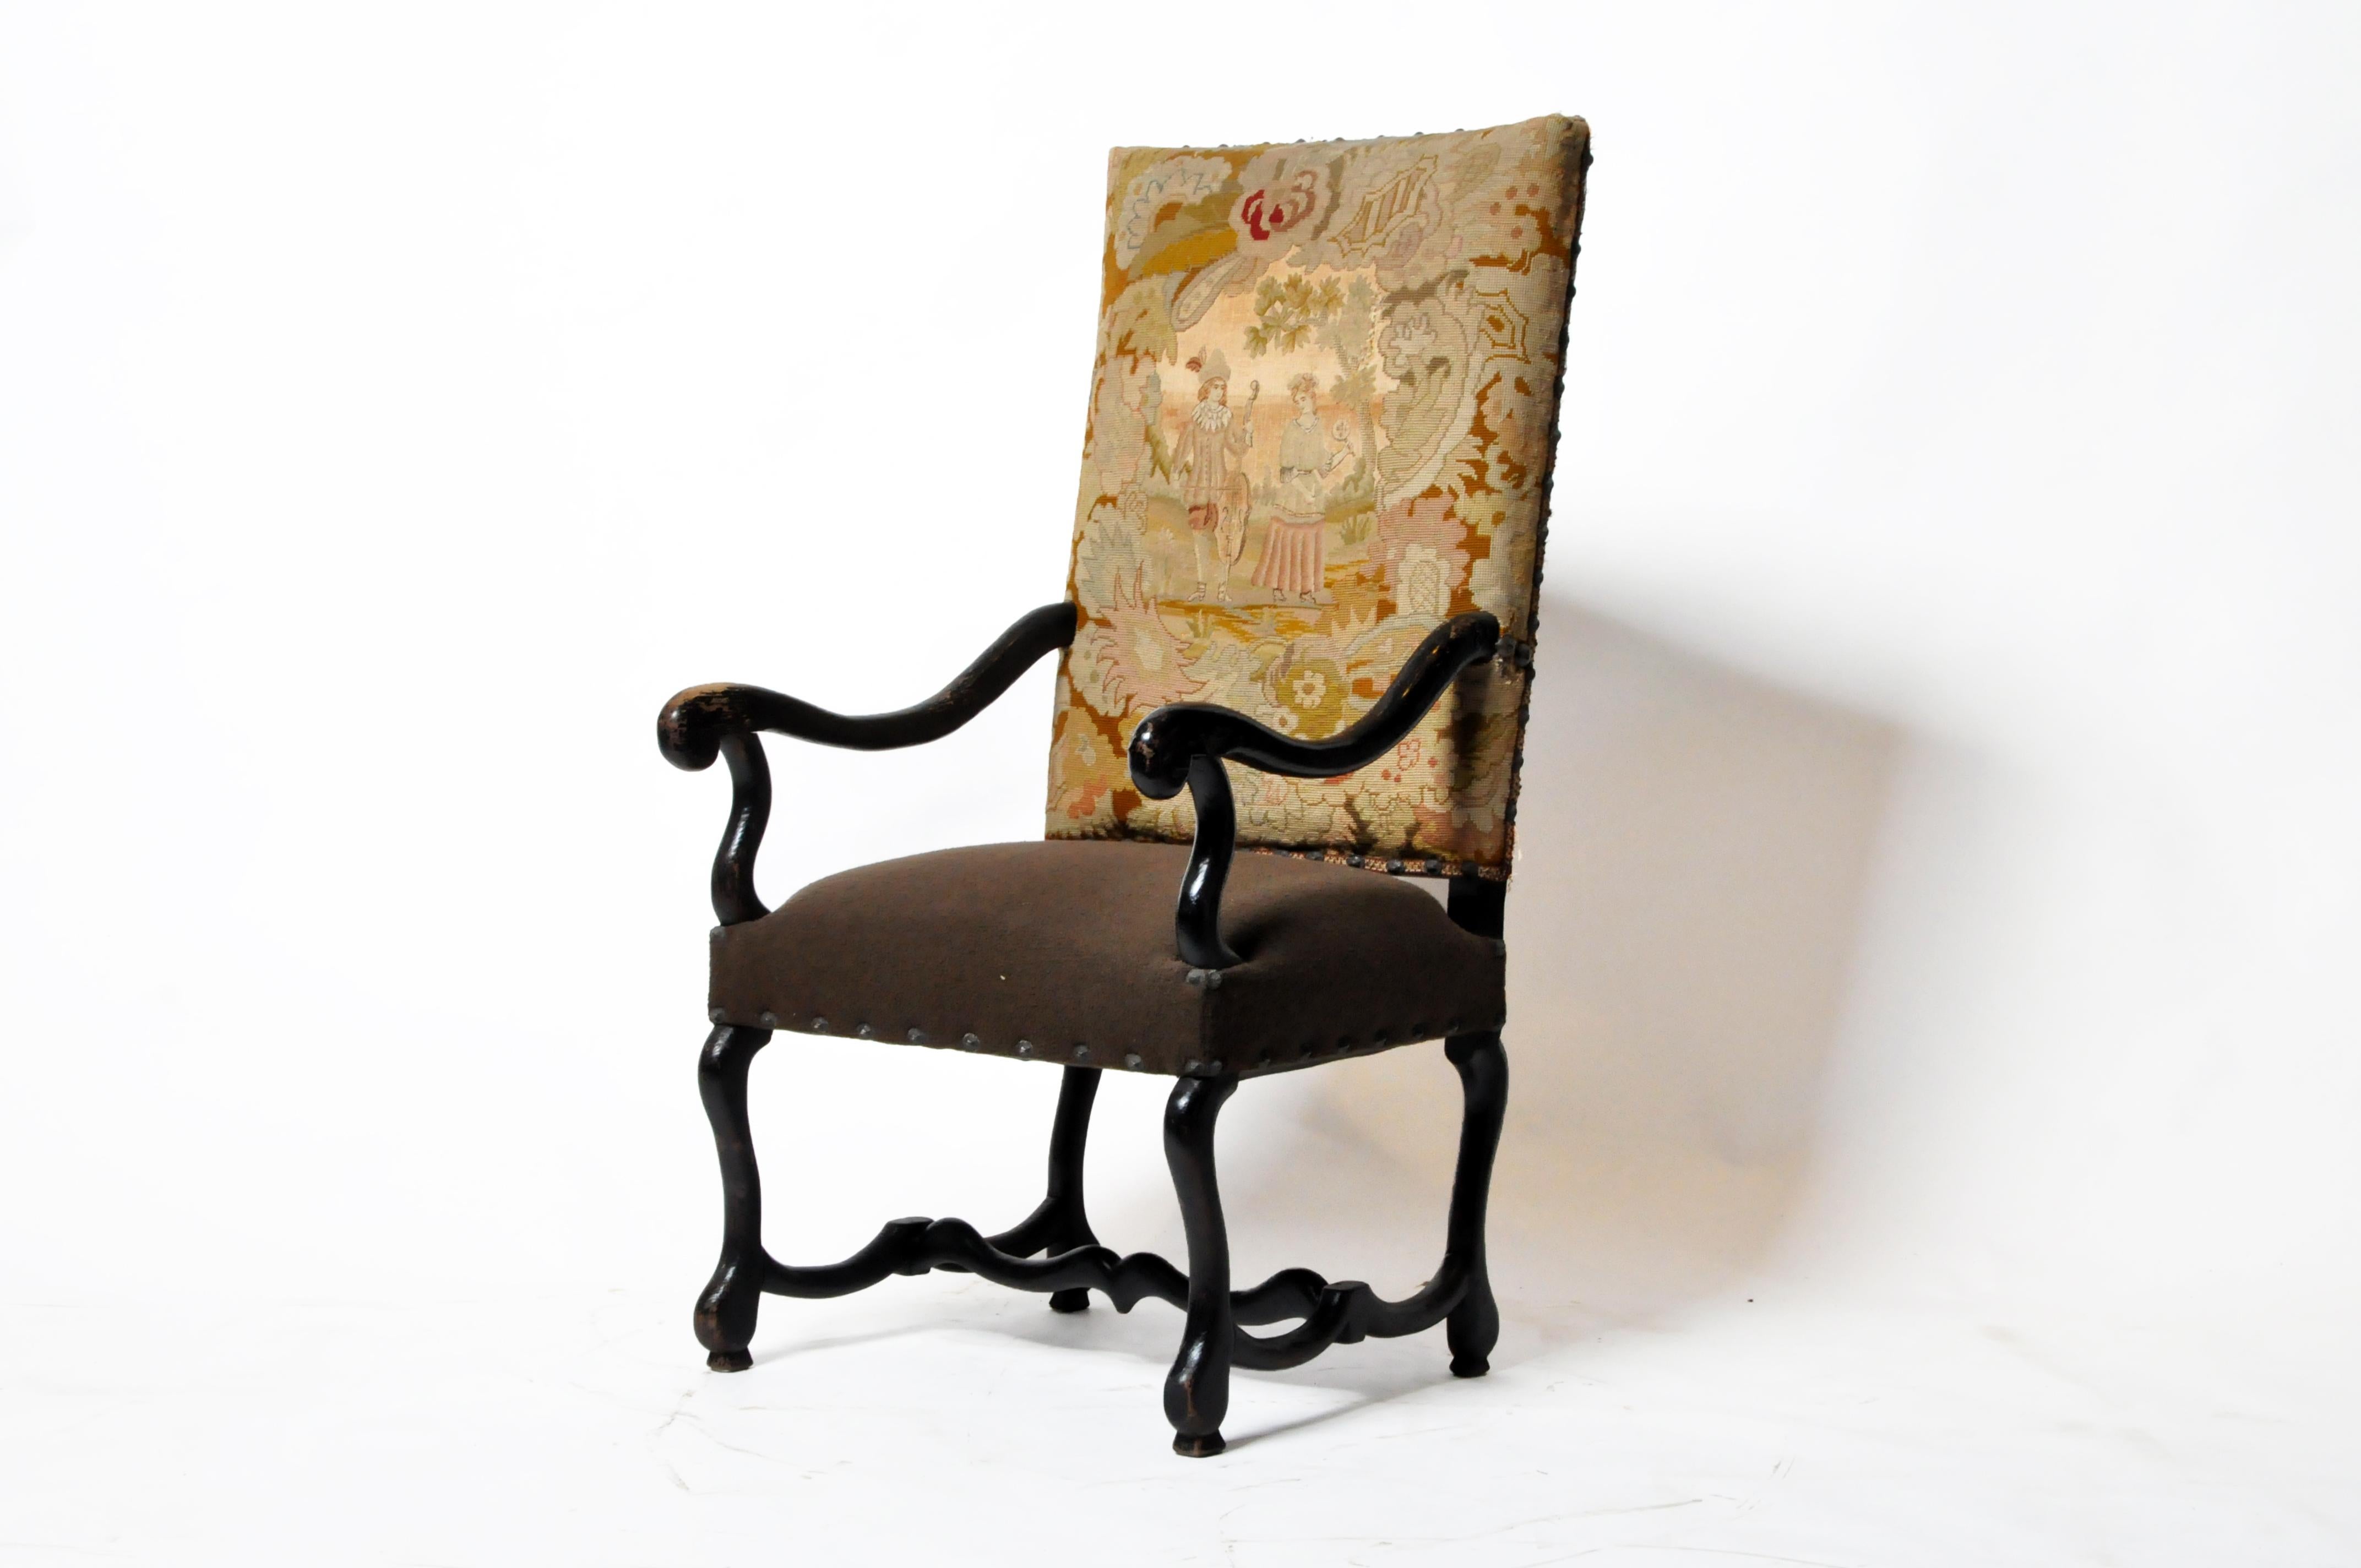 This impressive French arm chair chair is carved from walnut and features an upholstered antique tapestry back and boiled wool seat. The original seat cushion stuffing has been supplemented by contemporary materials. The arms and legs have been